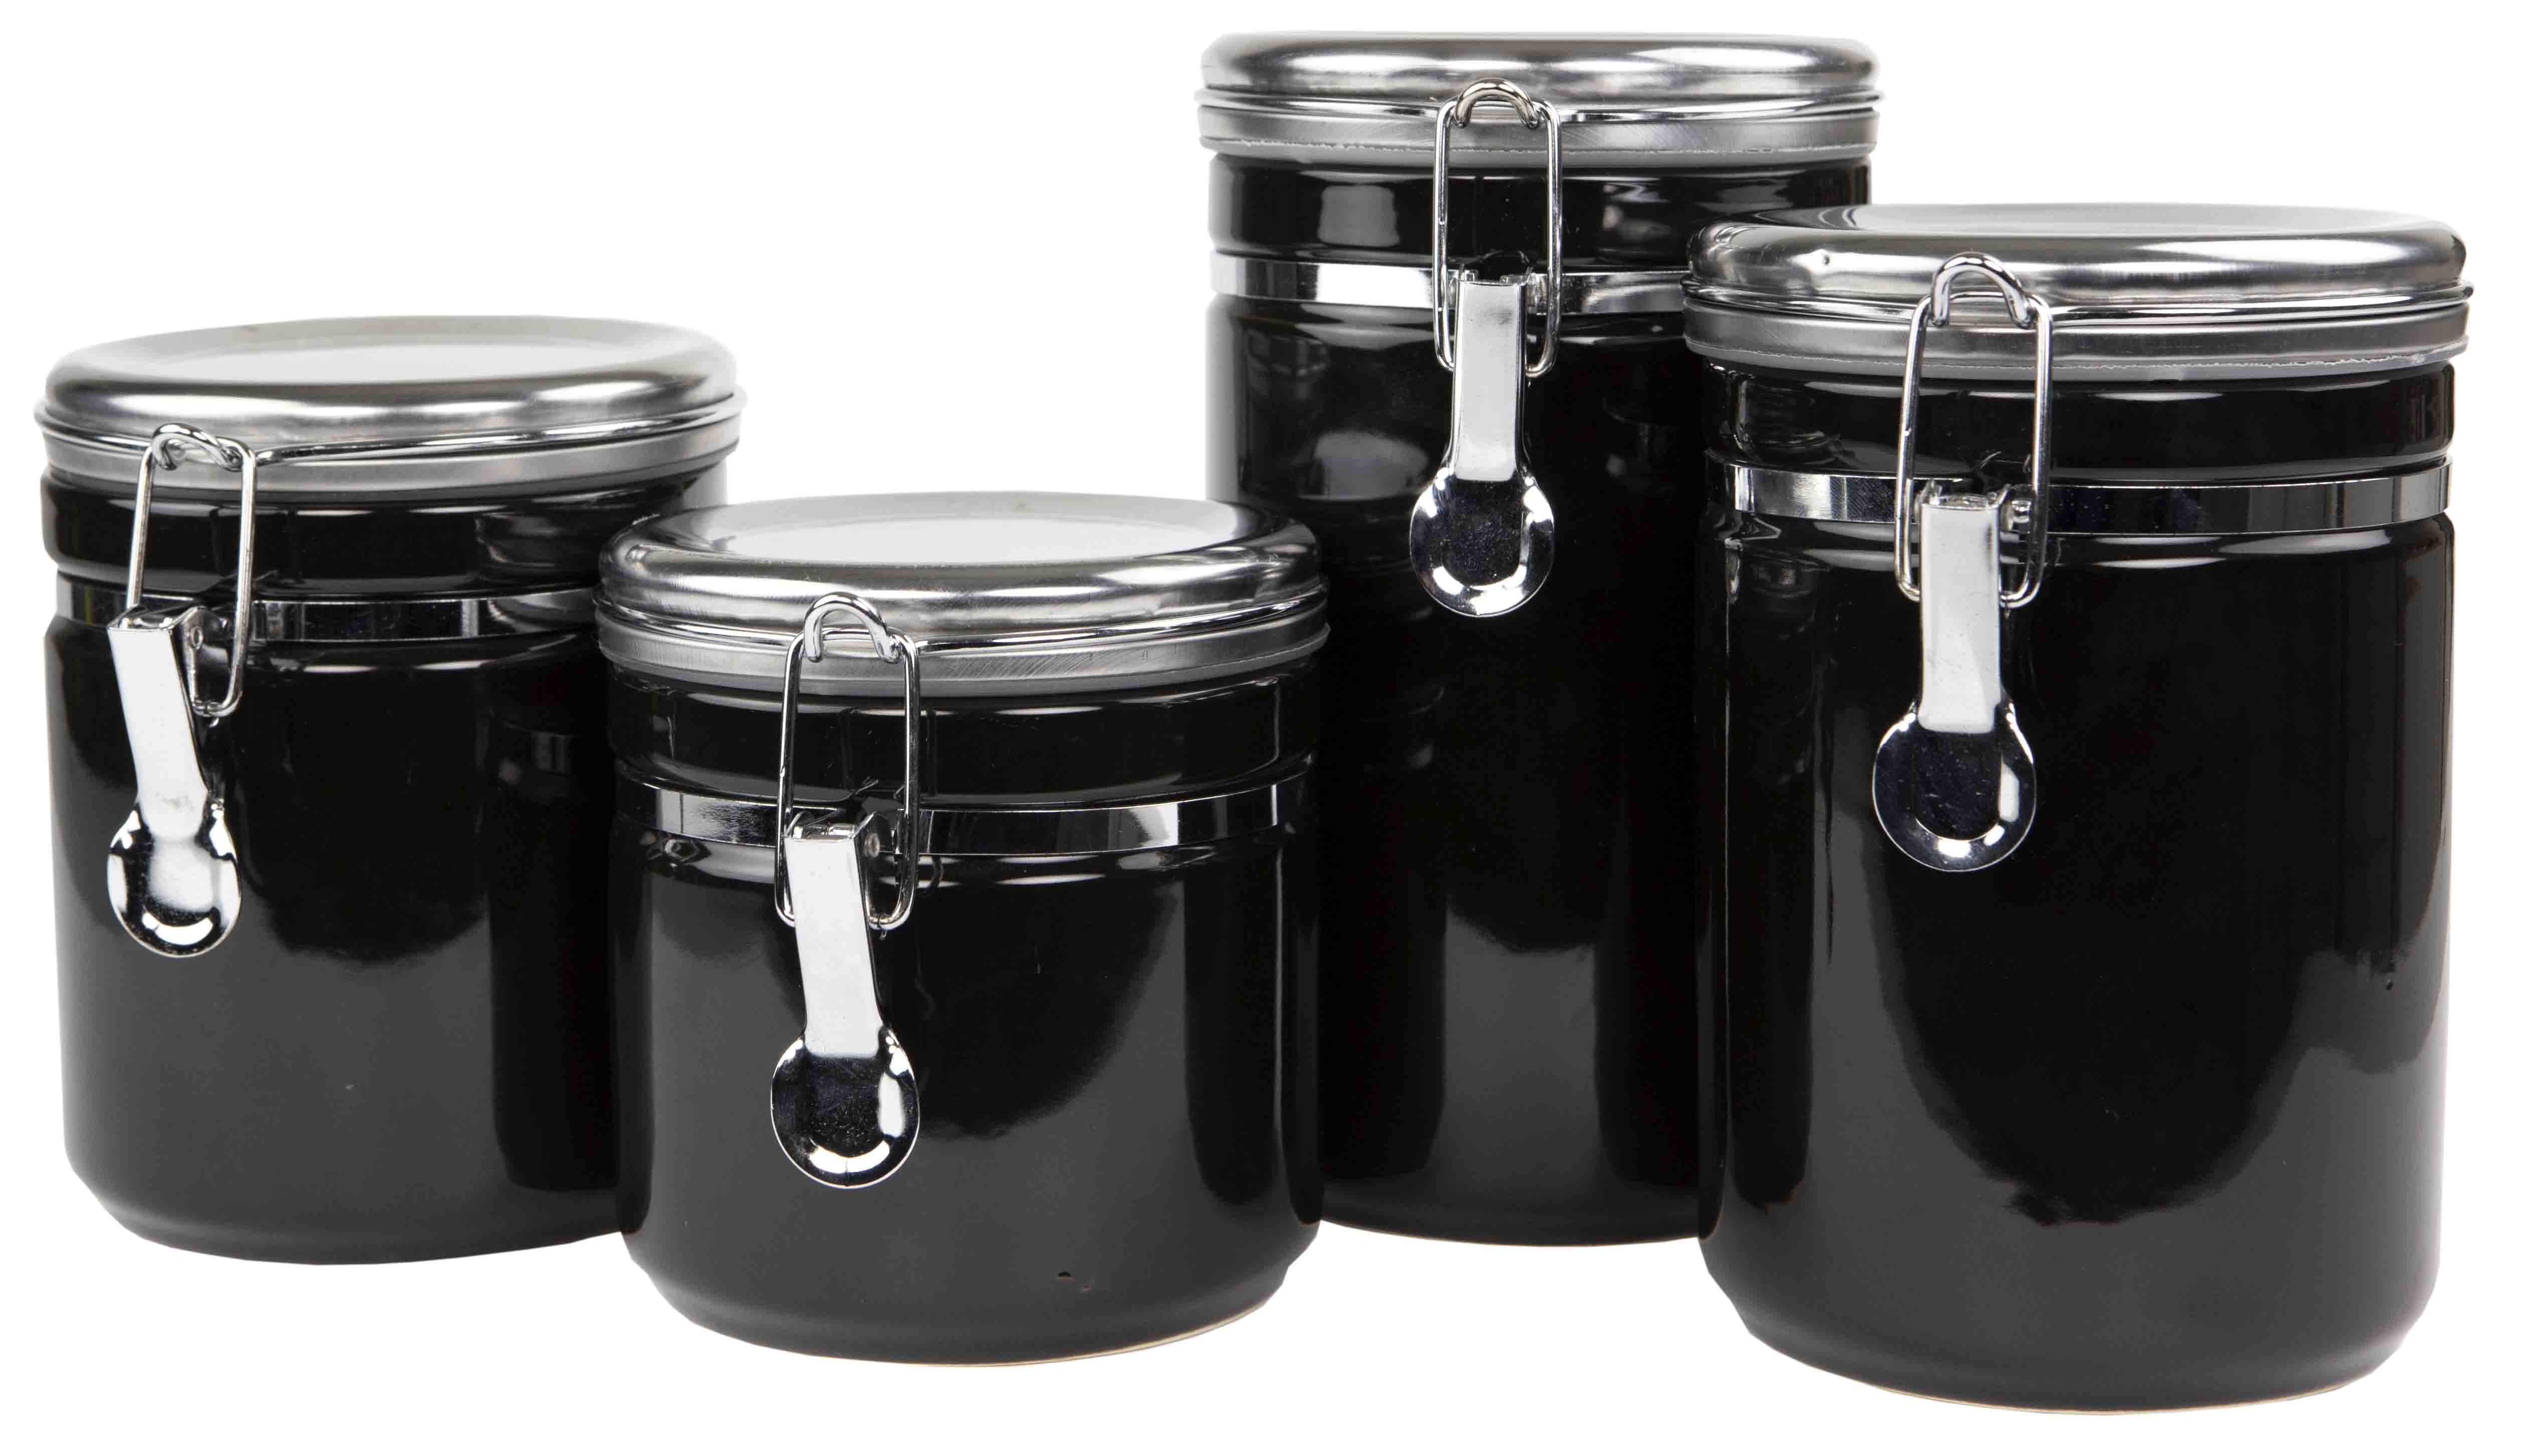 Home Basics Canister Set With Stainless Steel Tops Black 4 Piece 25 Oz 33 Oz 40 Oz 45 Oz